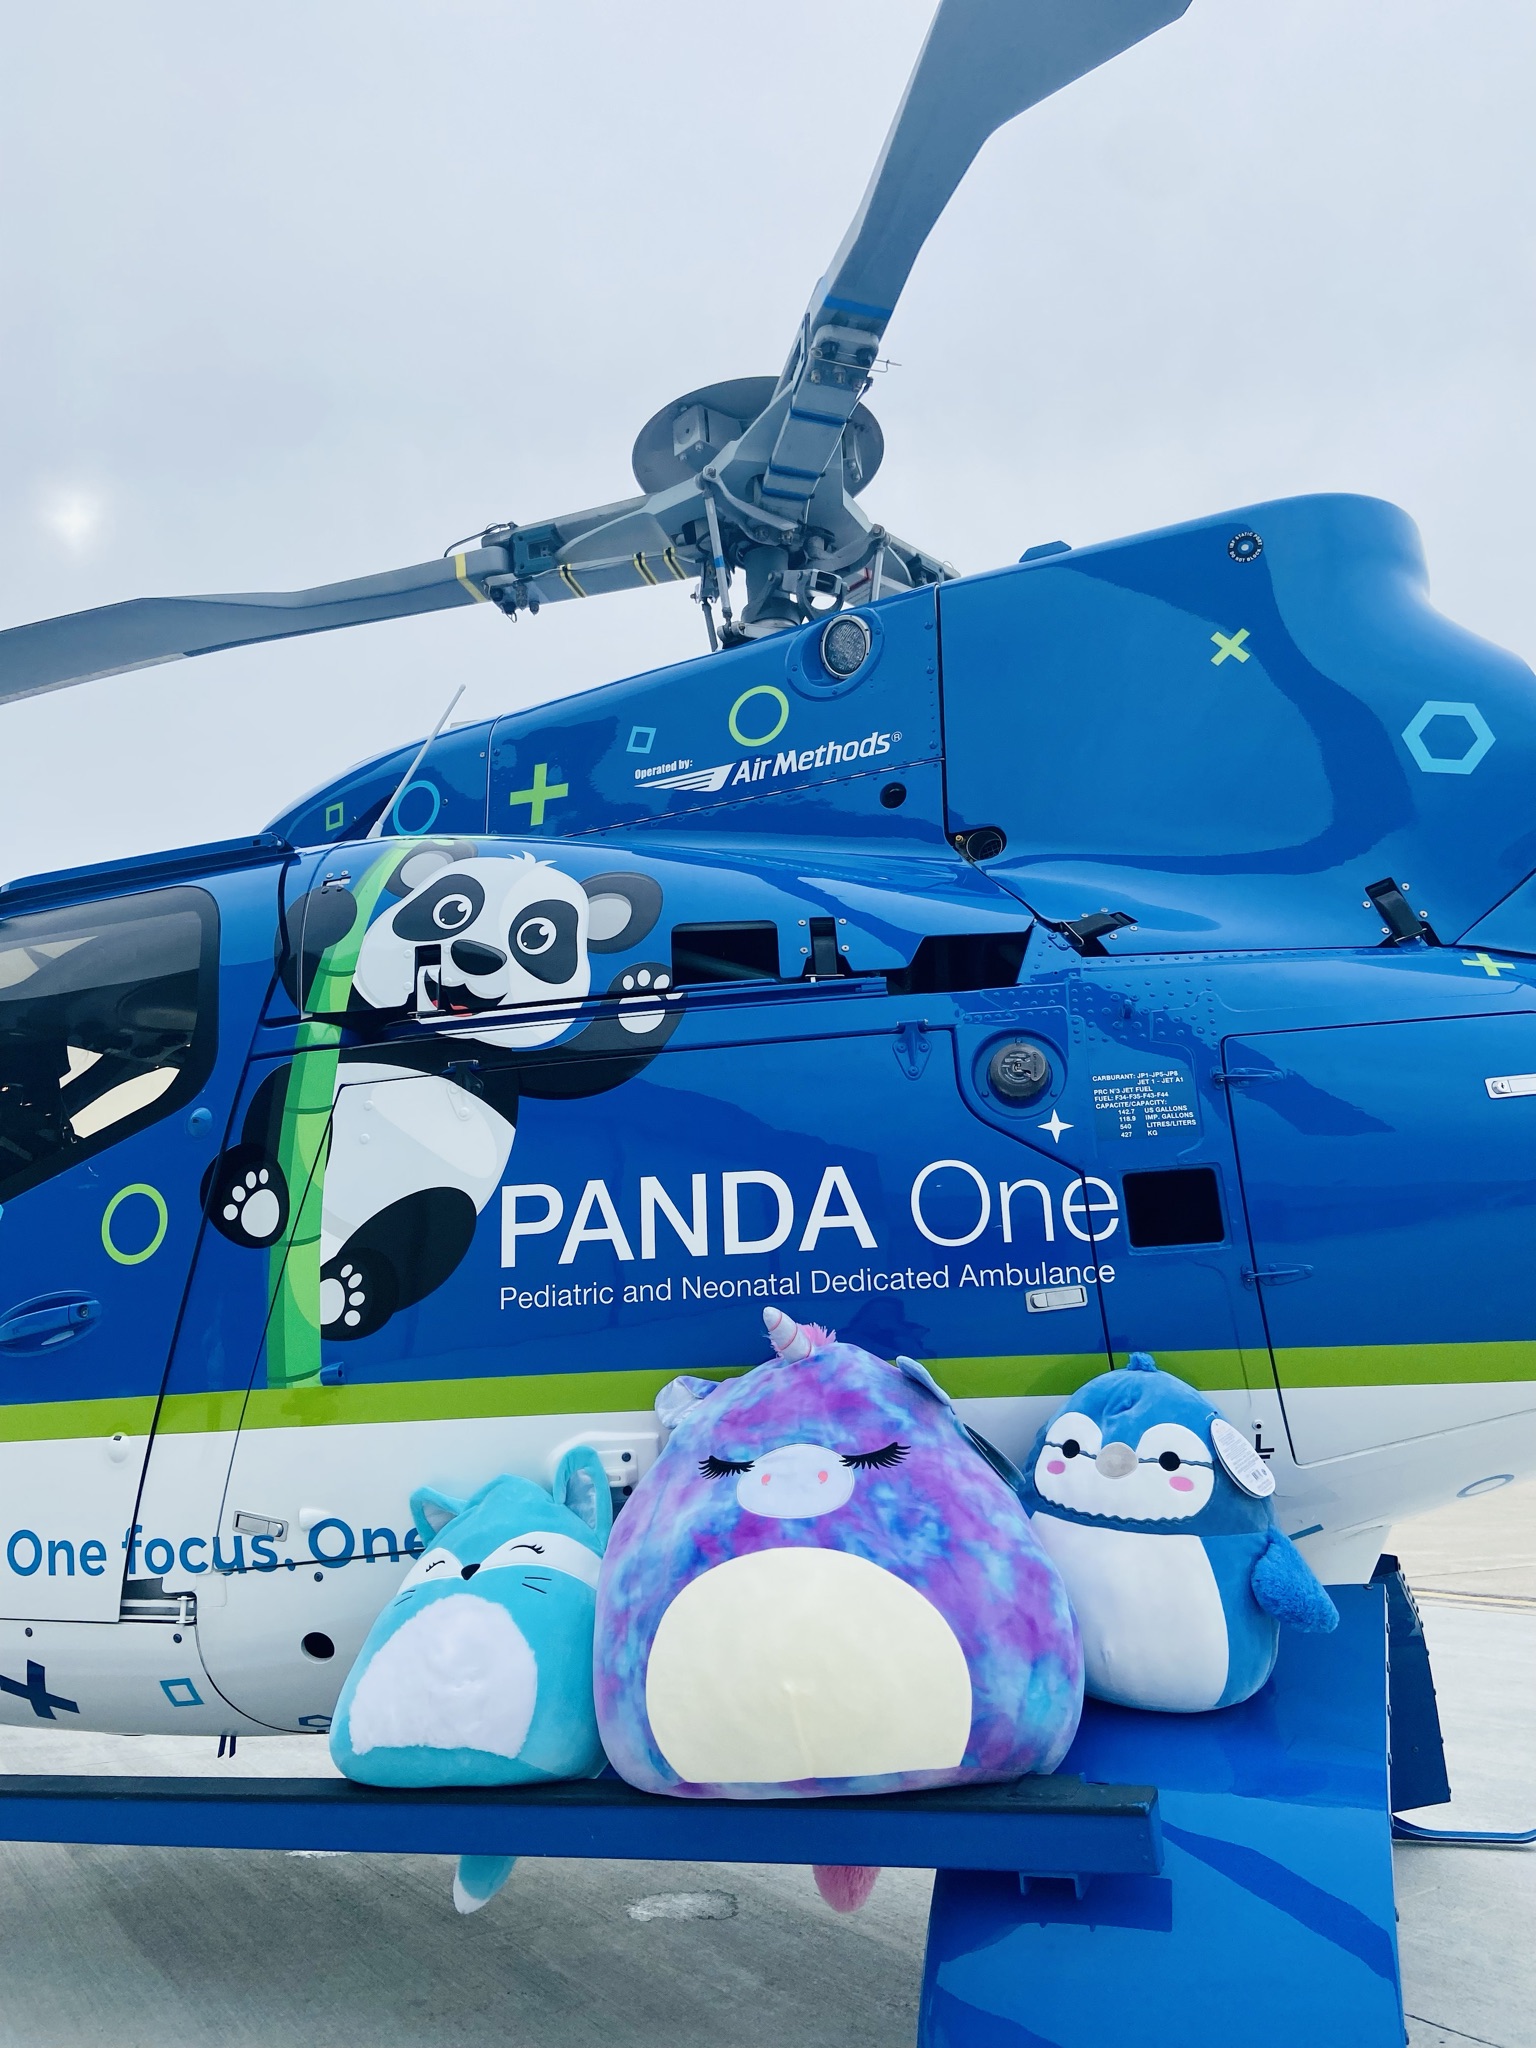 Panda One Helicopter and Squish Squad